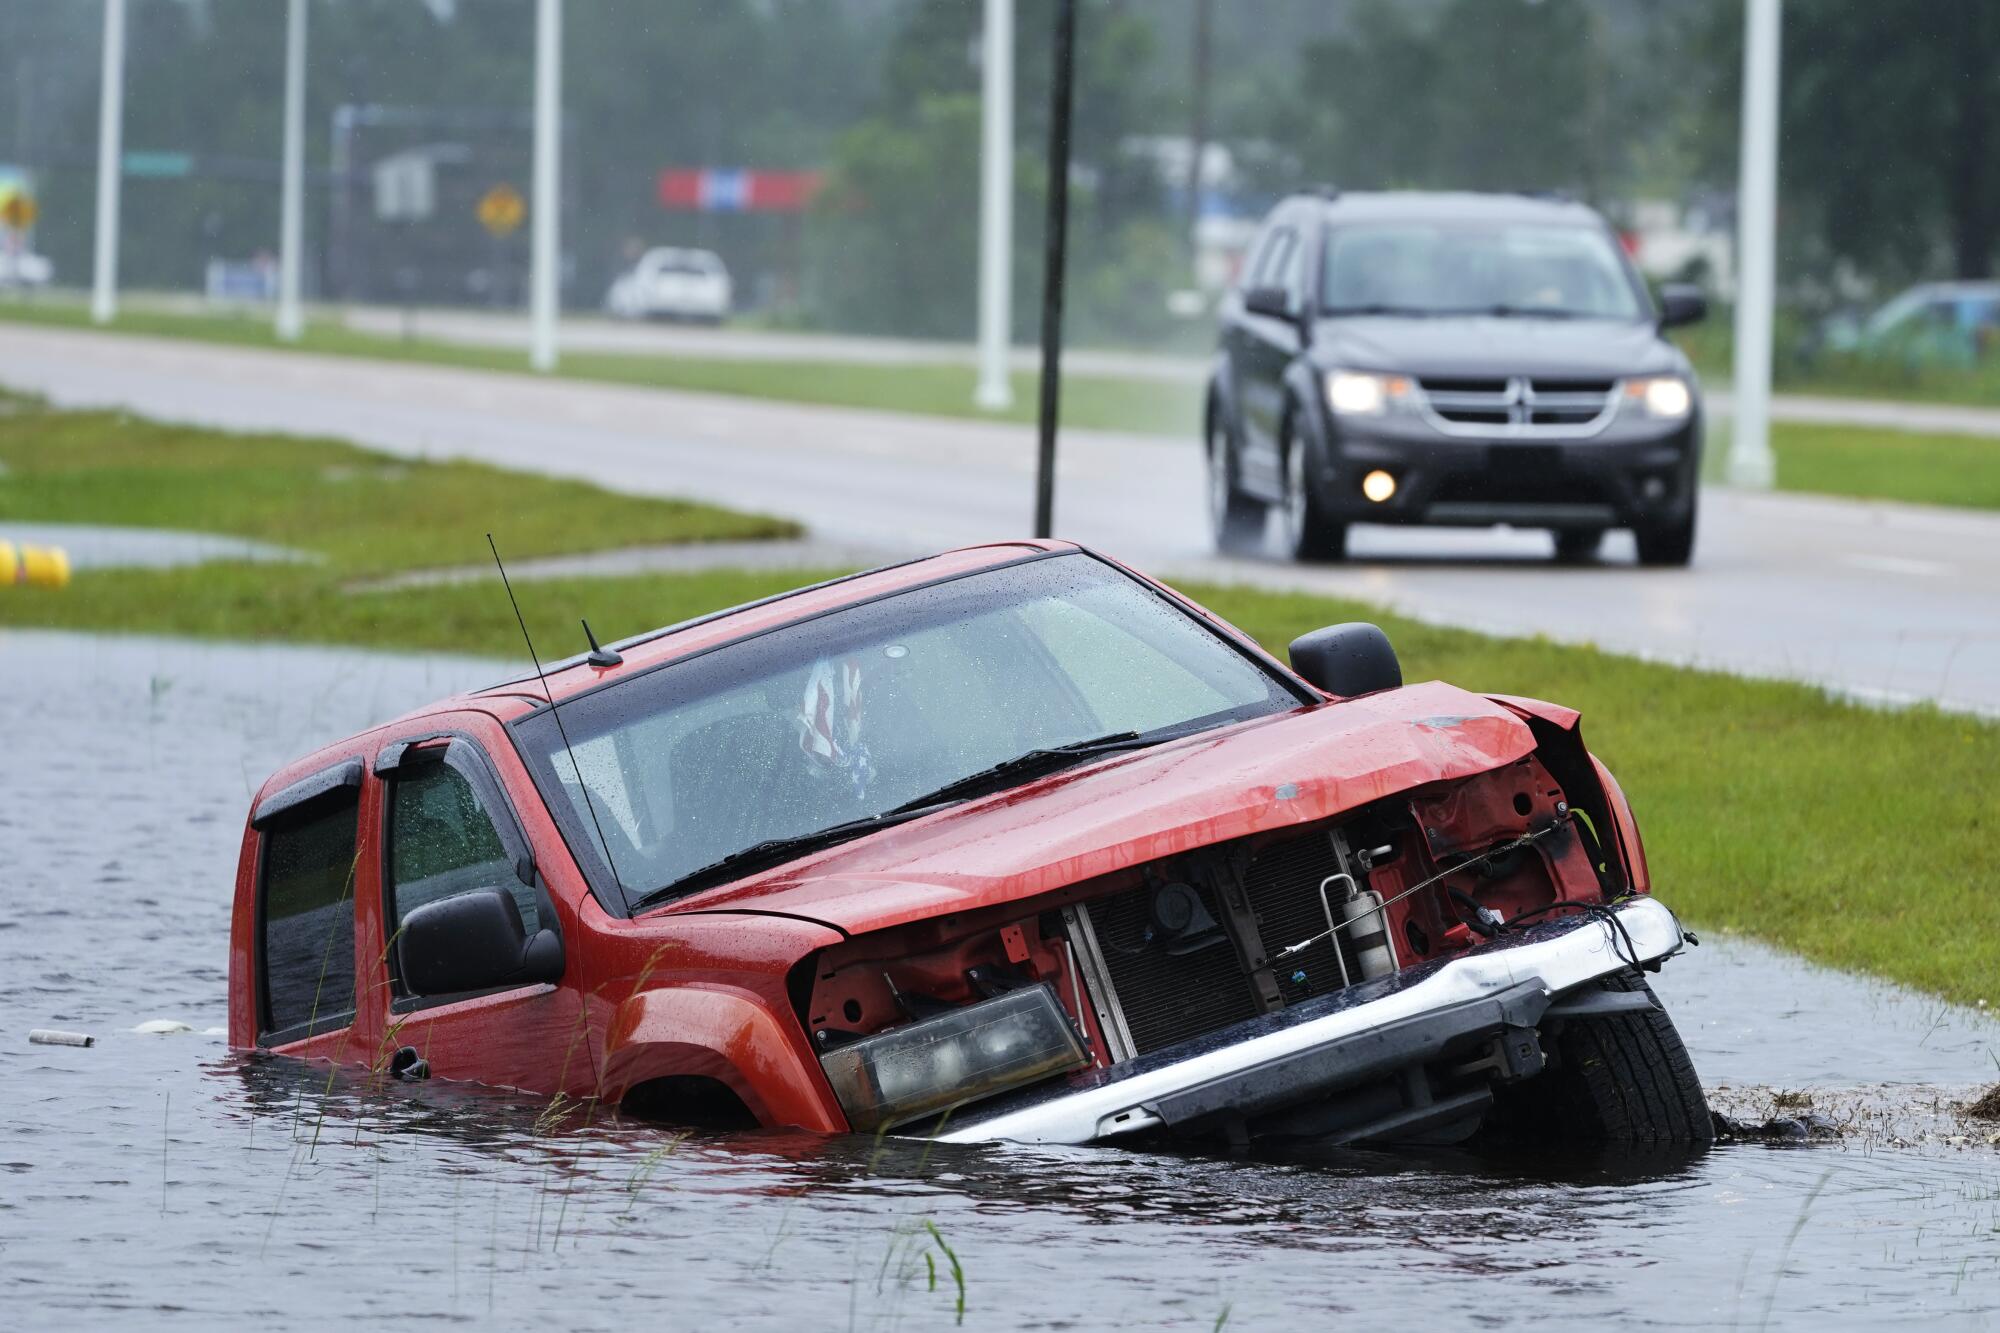 An abandoned vehicle is half-submerged in a ditch.